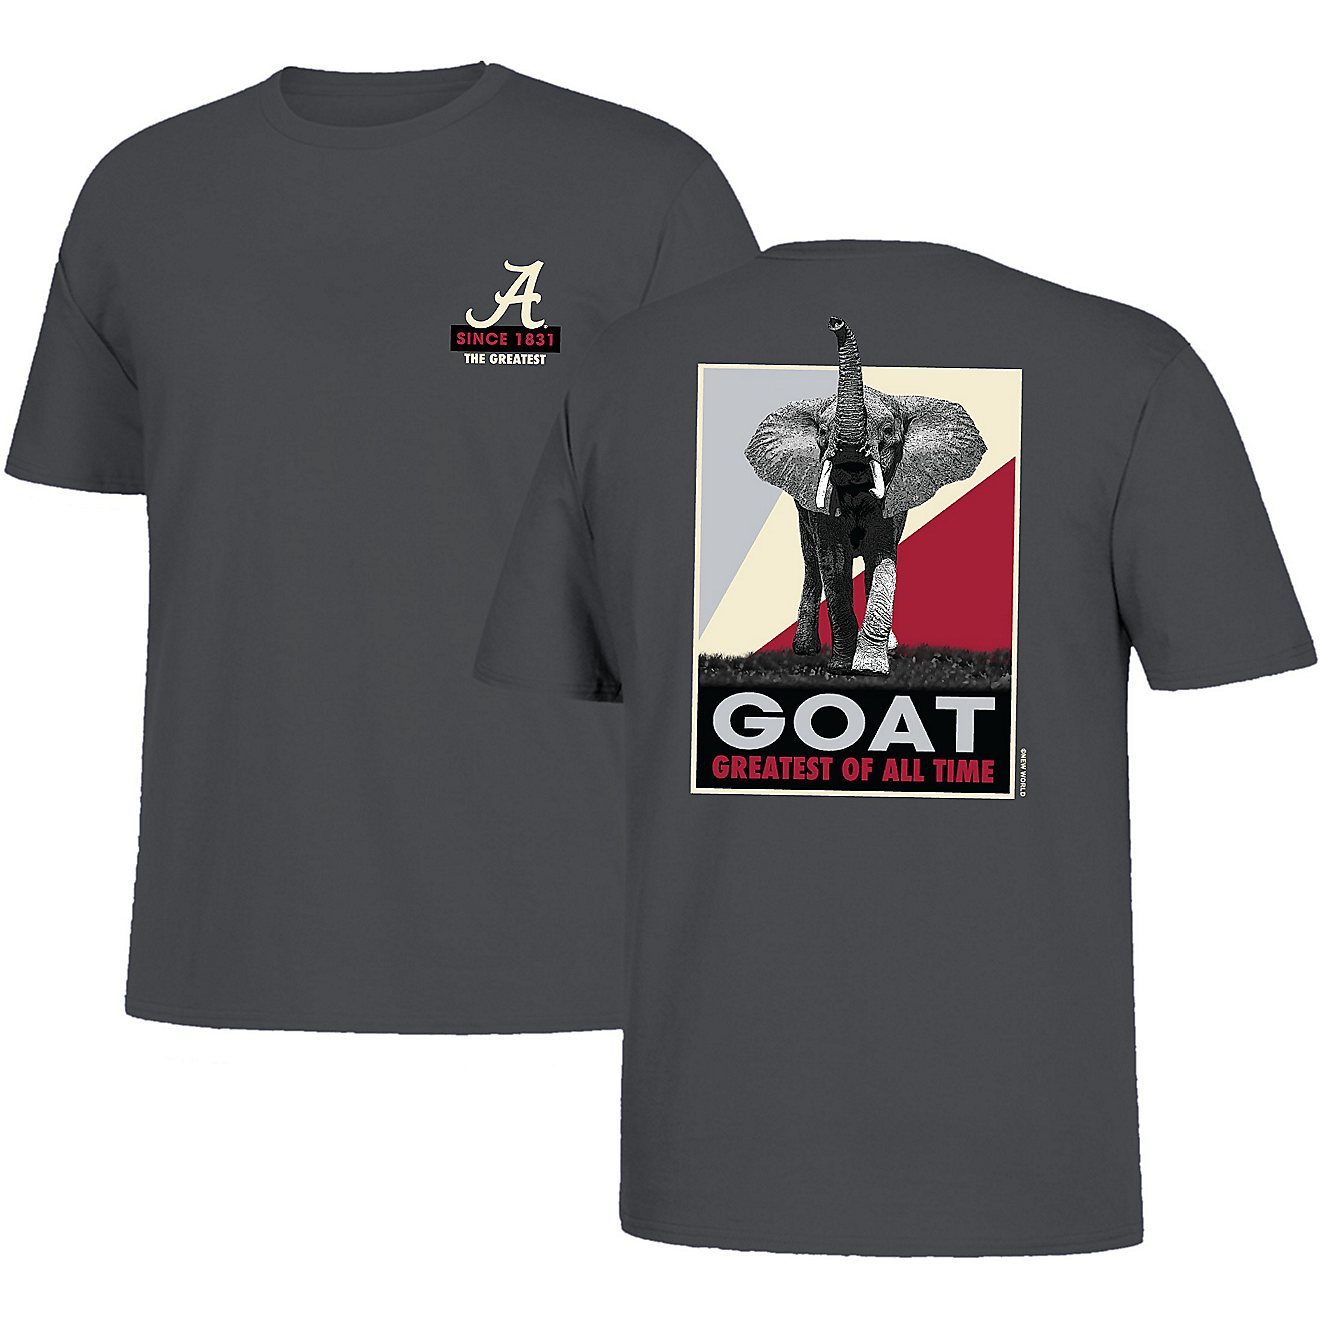 New World Graphics Men's University of Alabama G.O.A.T. T-shirt                                                                  - view number 1